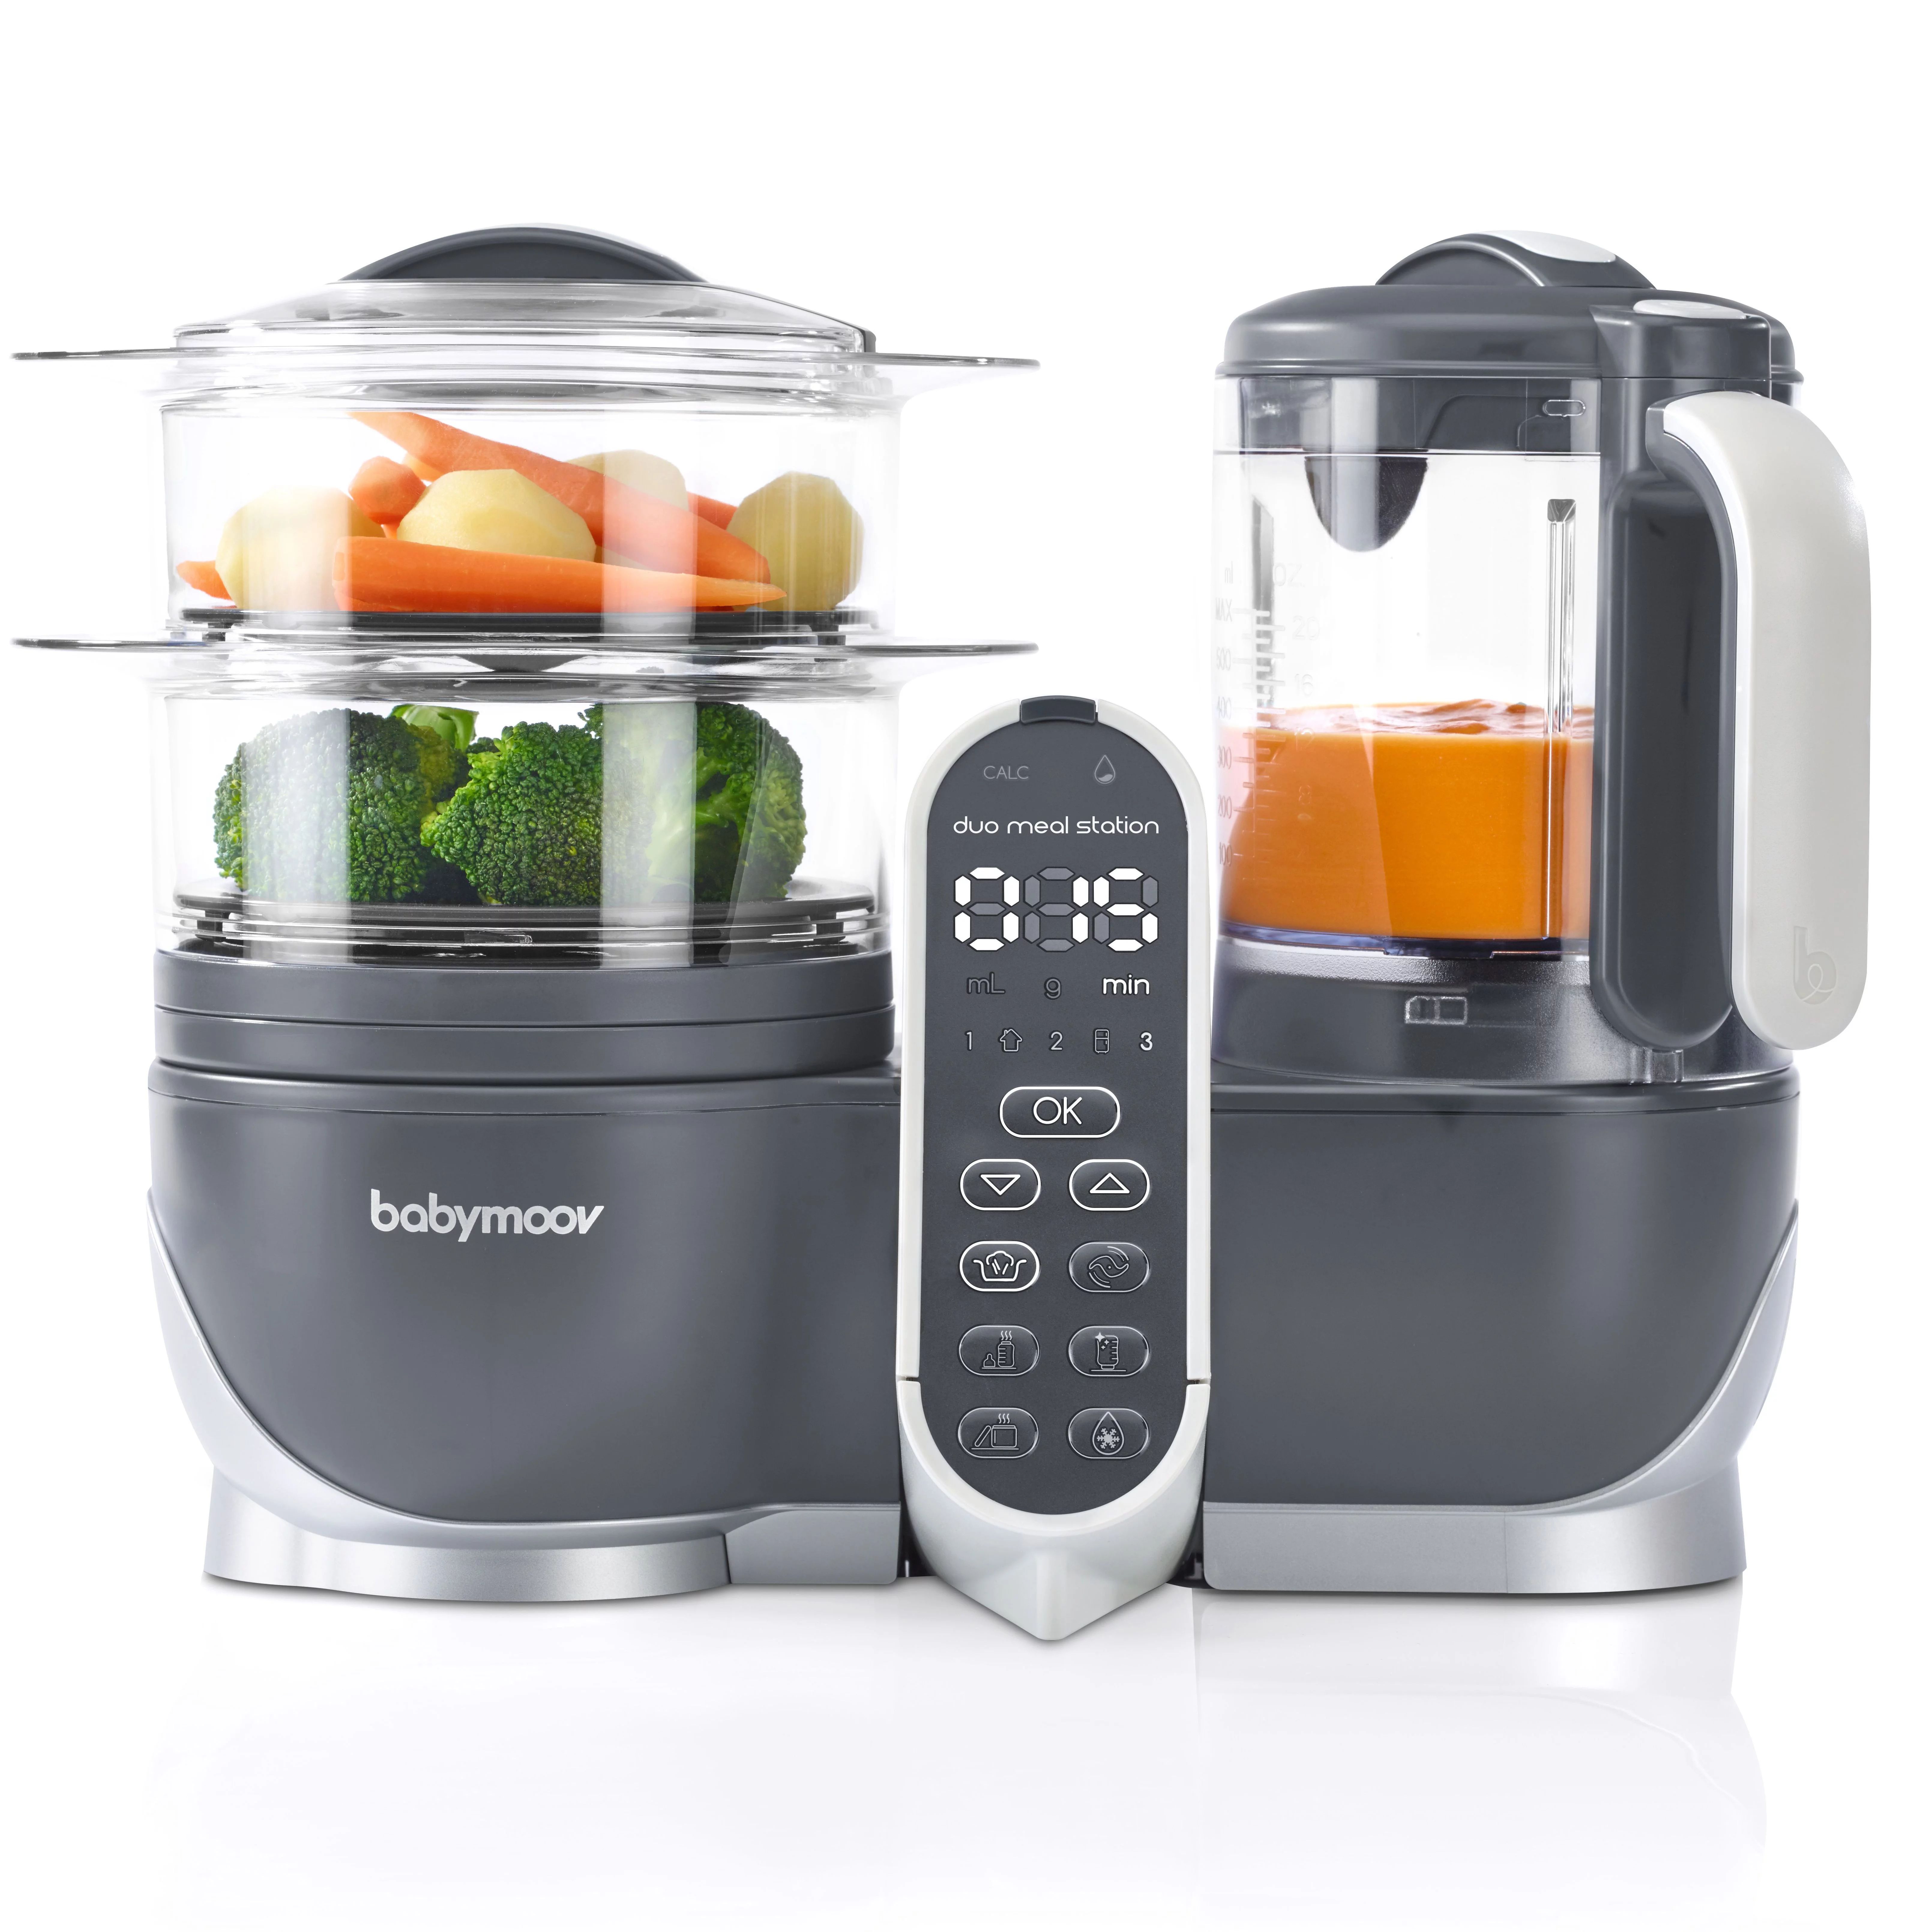 Babymoov Duo Meal Station - 6 in 1 Food Maker with Steam Cooker, Blend & Puree (9 cups) | Walmart (US)